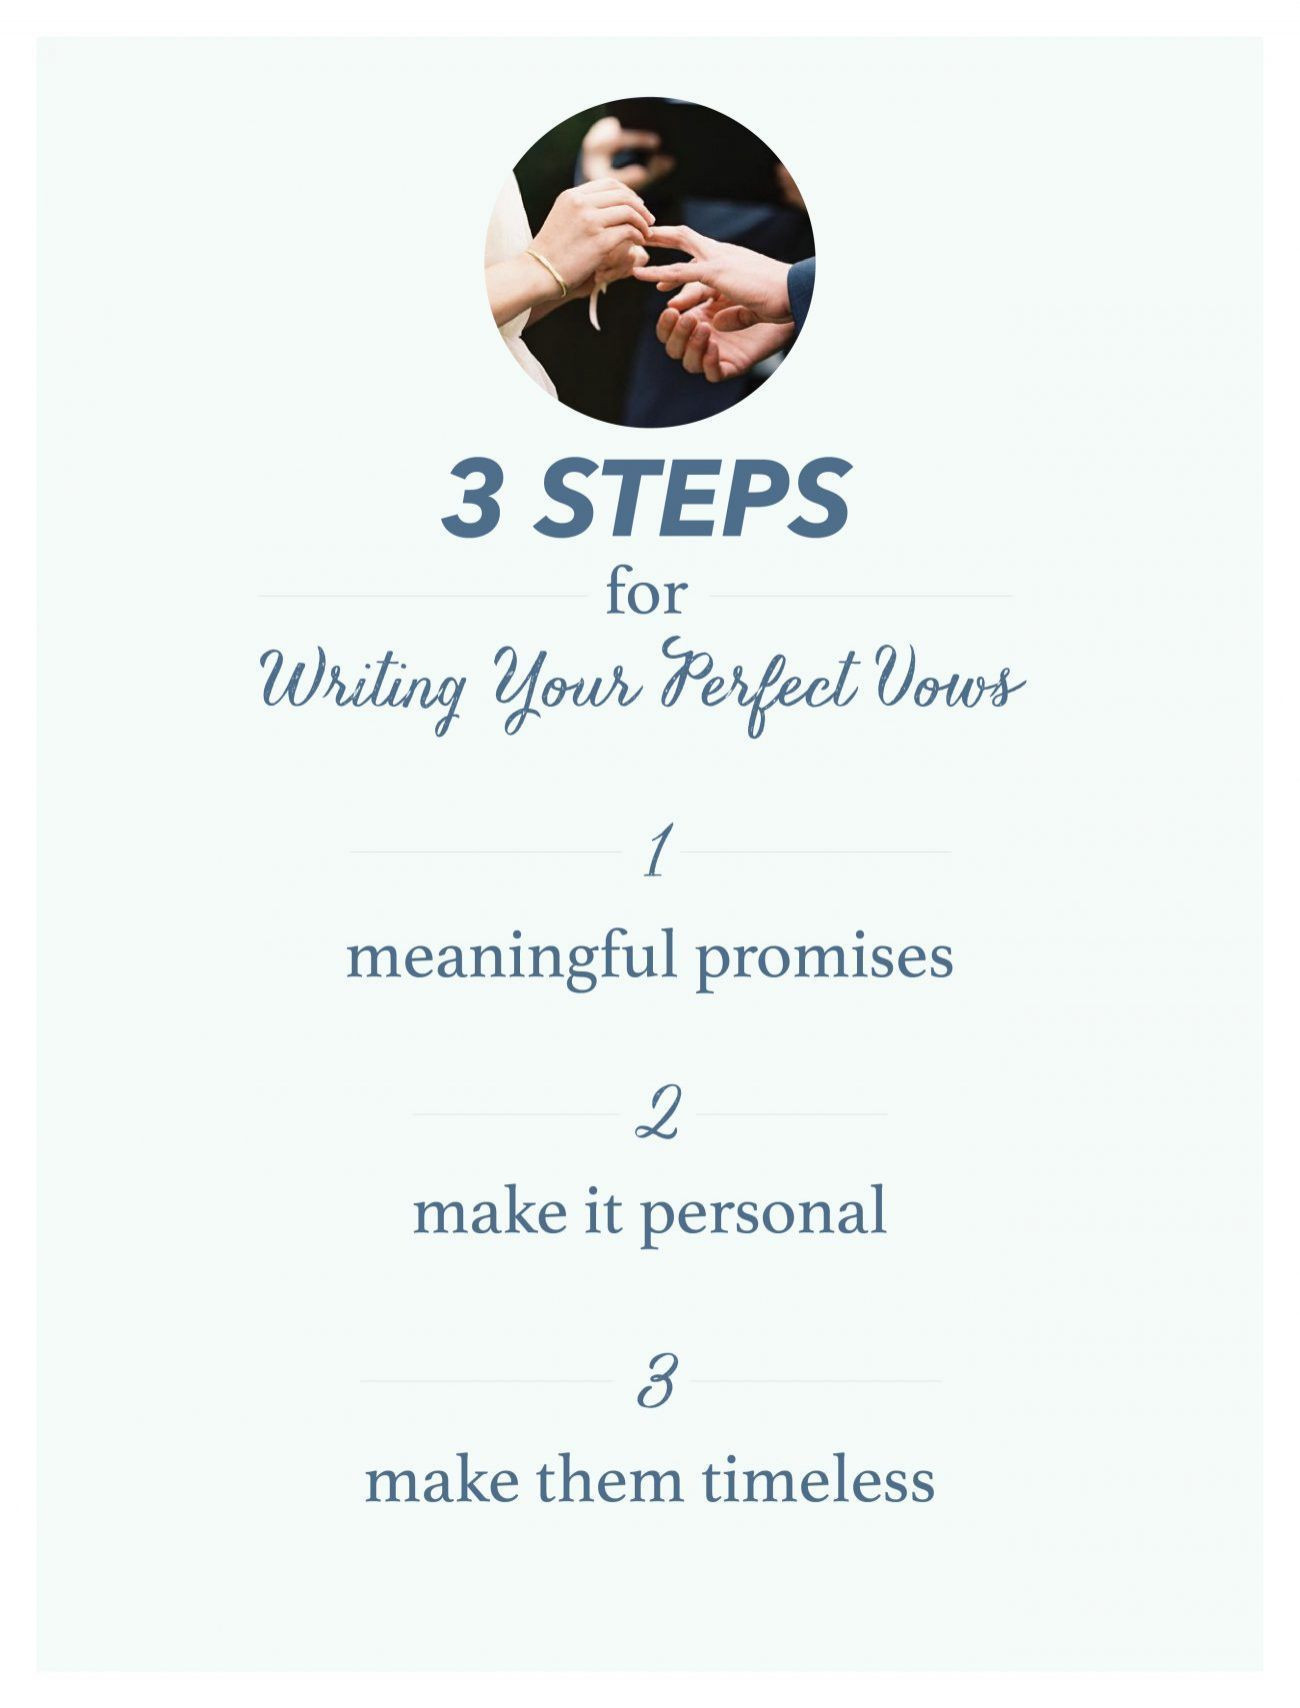 How To Write Wedding Vows For Him
 A Guide to Writing Your Perfect Wedding Vows ce Wed